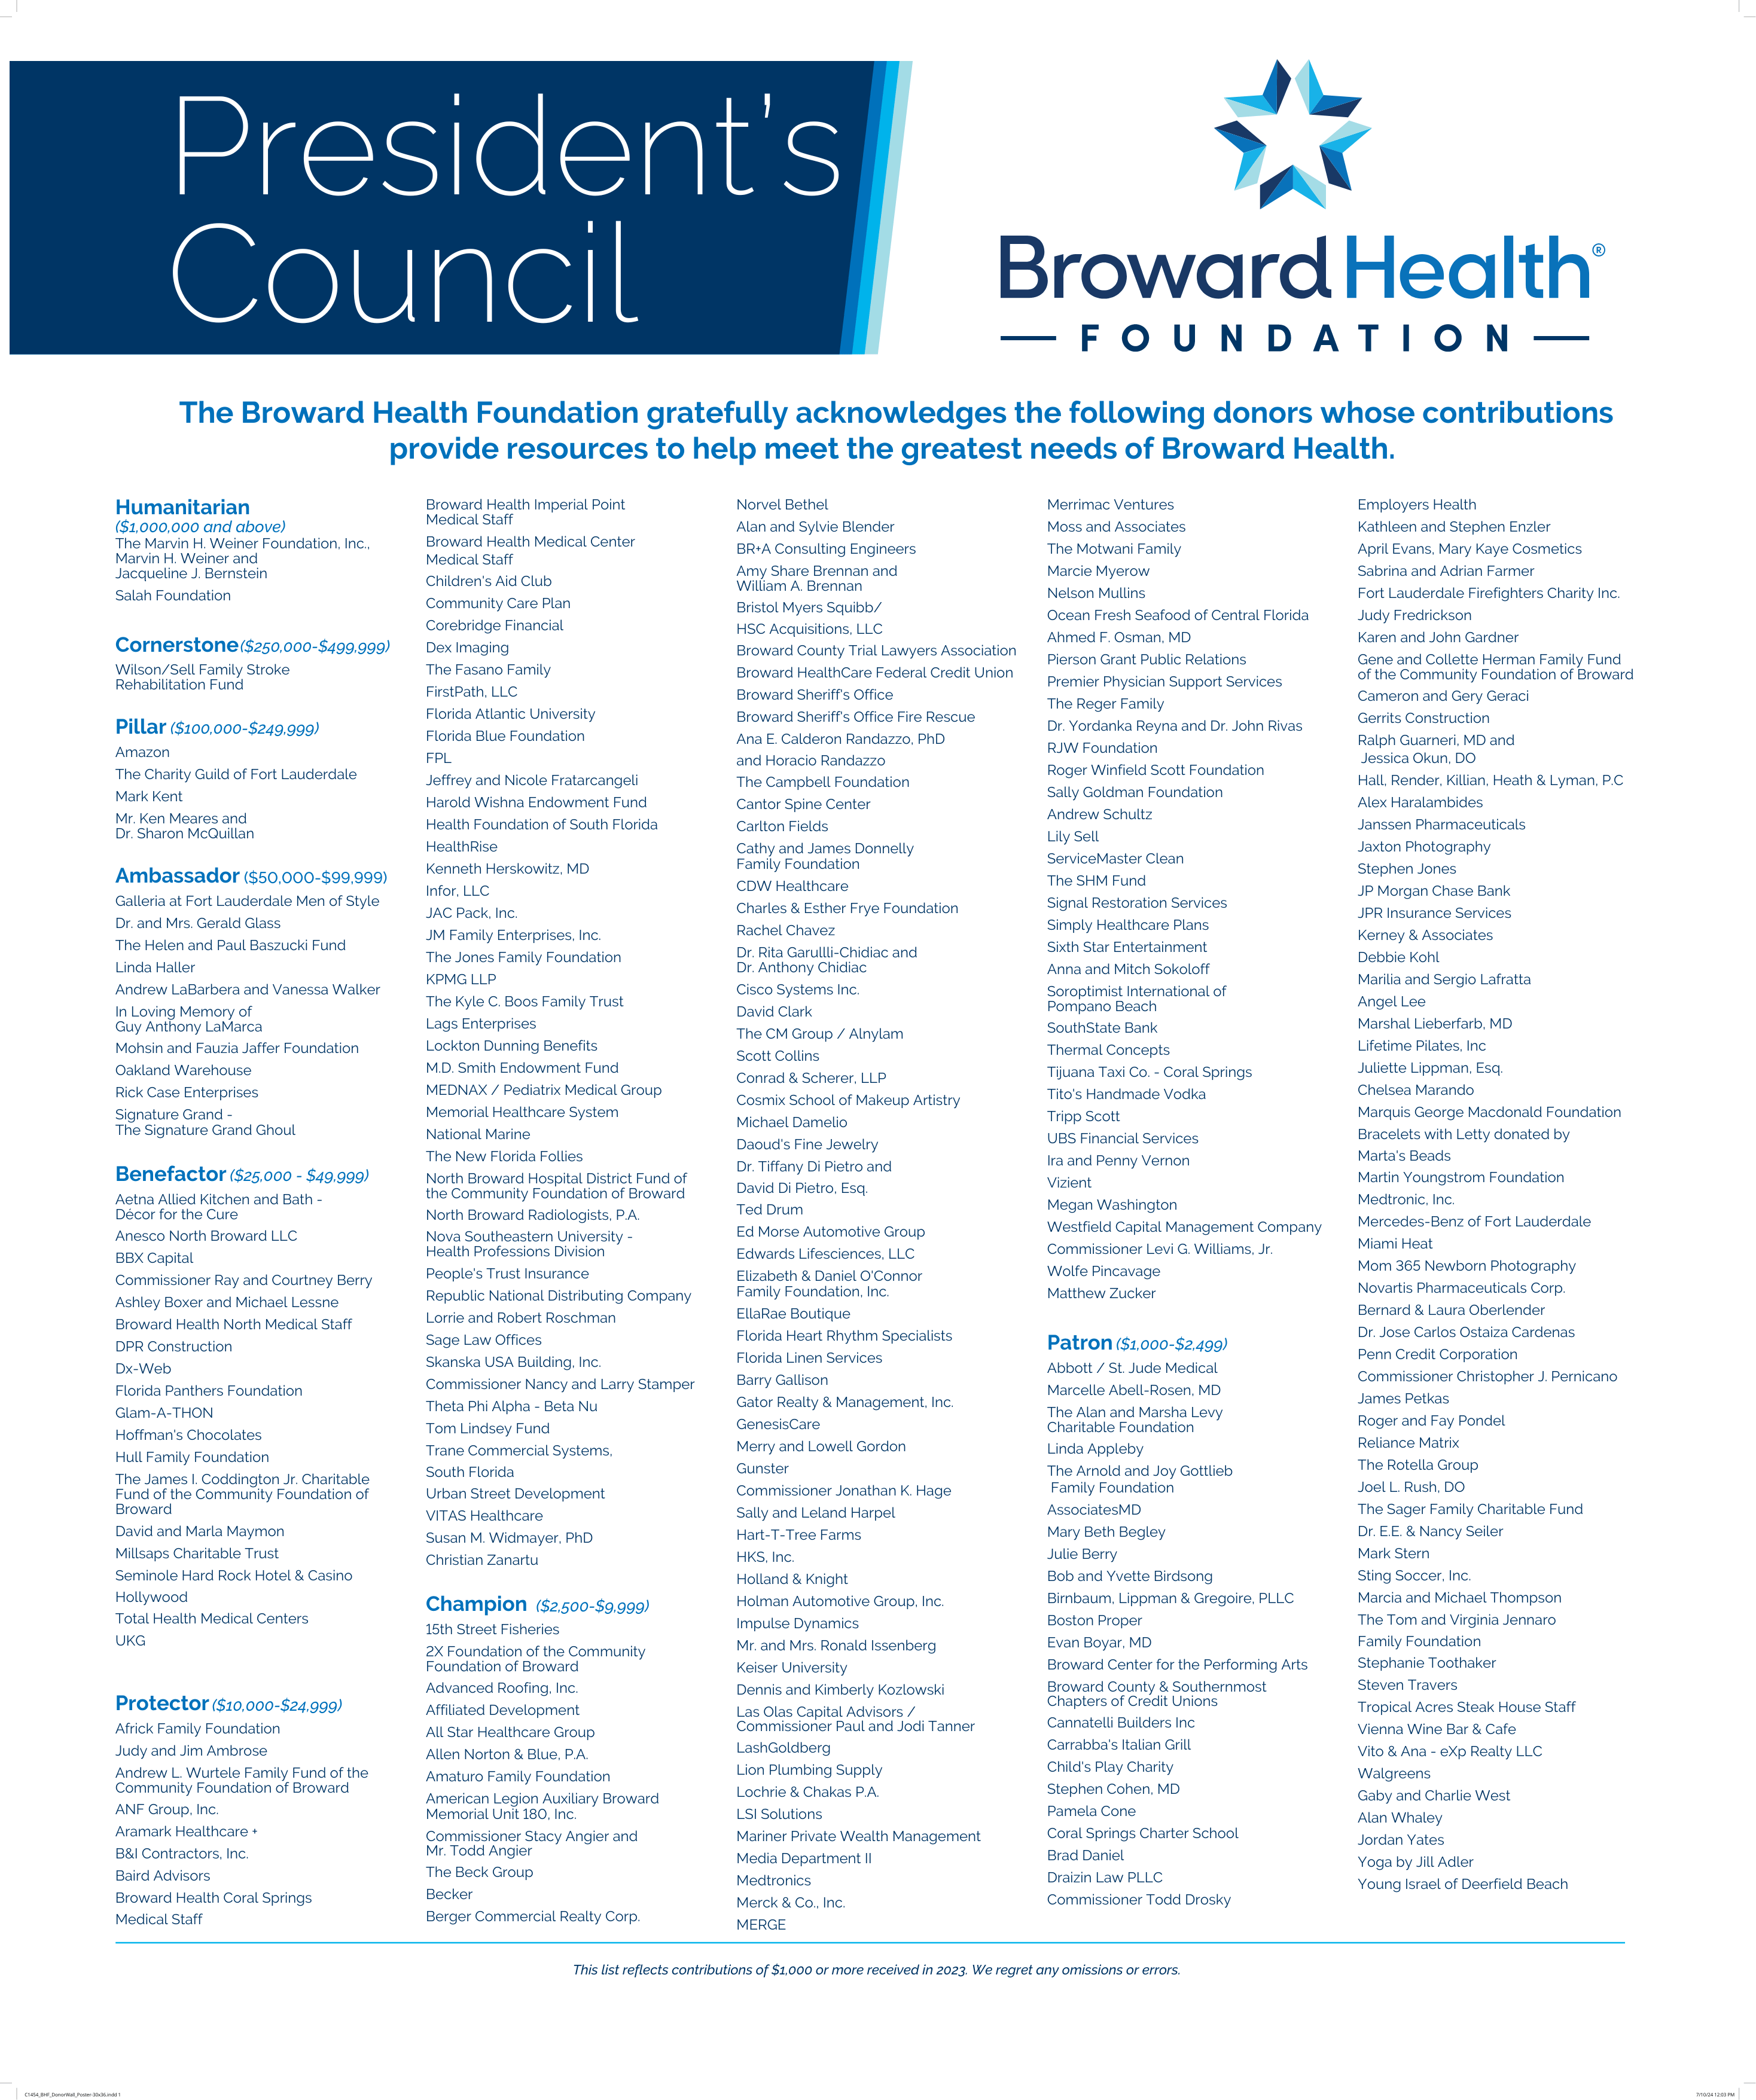 The Broward Health Foundation gratefully acknowledges the following donors whose contributions provide resources to help meet the greatest needs of Broward Health. 